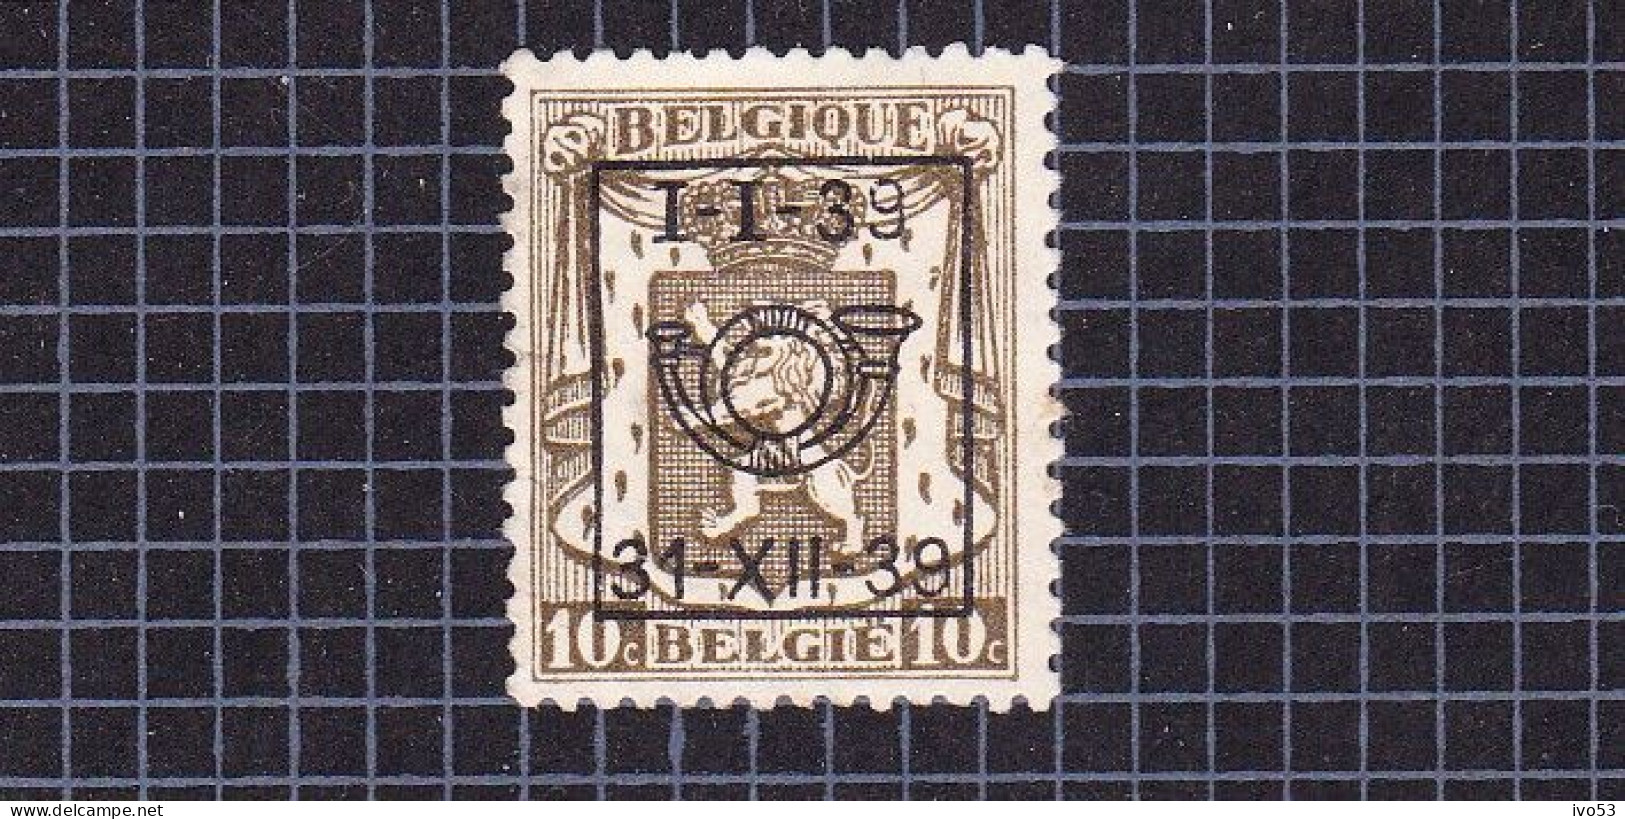 1939 Nr PRE421(*) Zonder Gom.Klein Staatswapen:10c.Opdruk I-I-39 / 31-XII-39. - Typo Precancels 1936-51 (Small Seal Of The State)